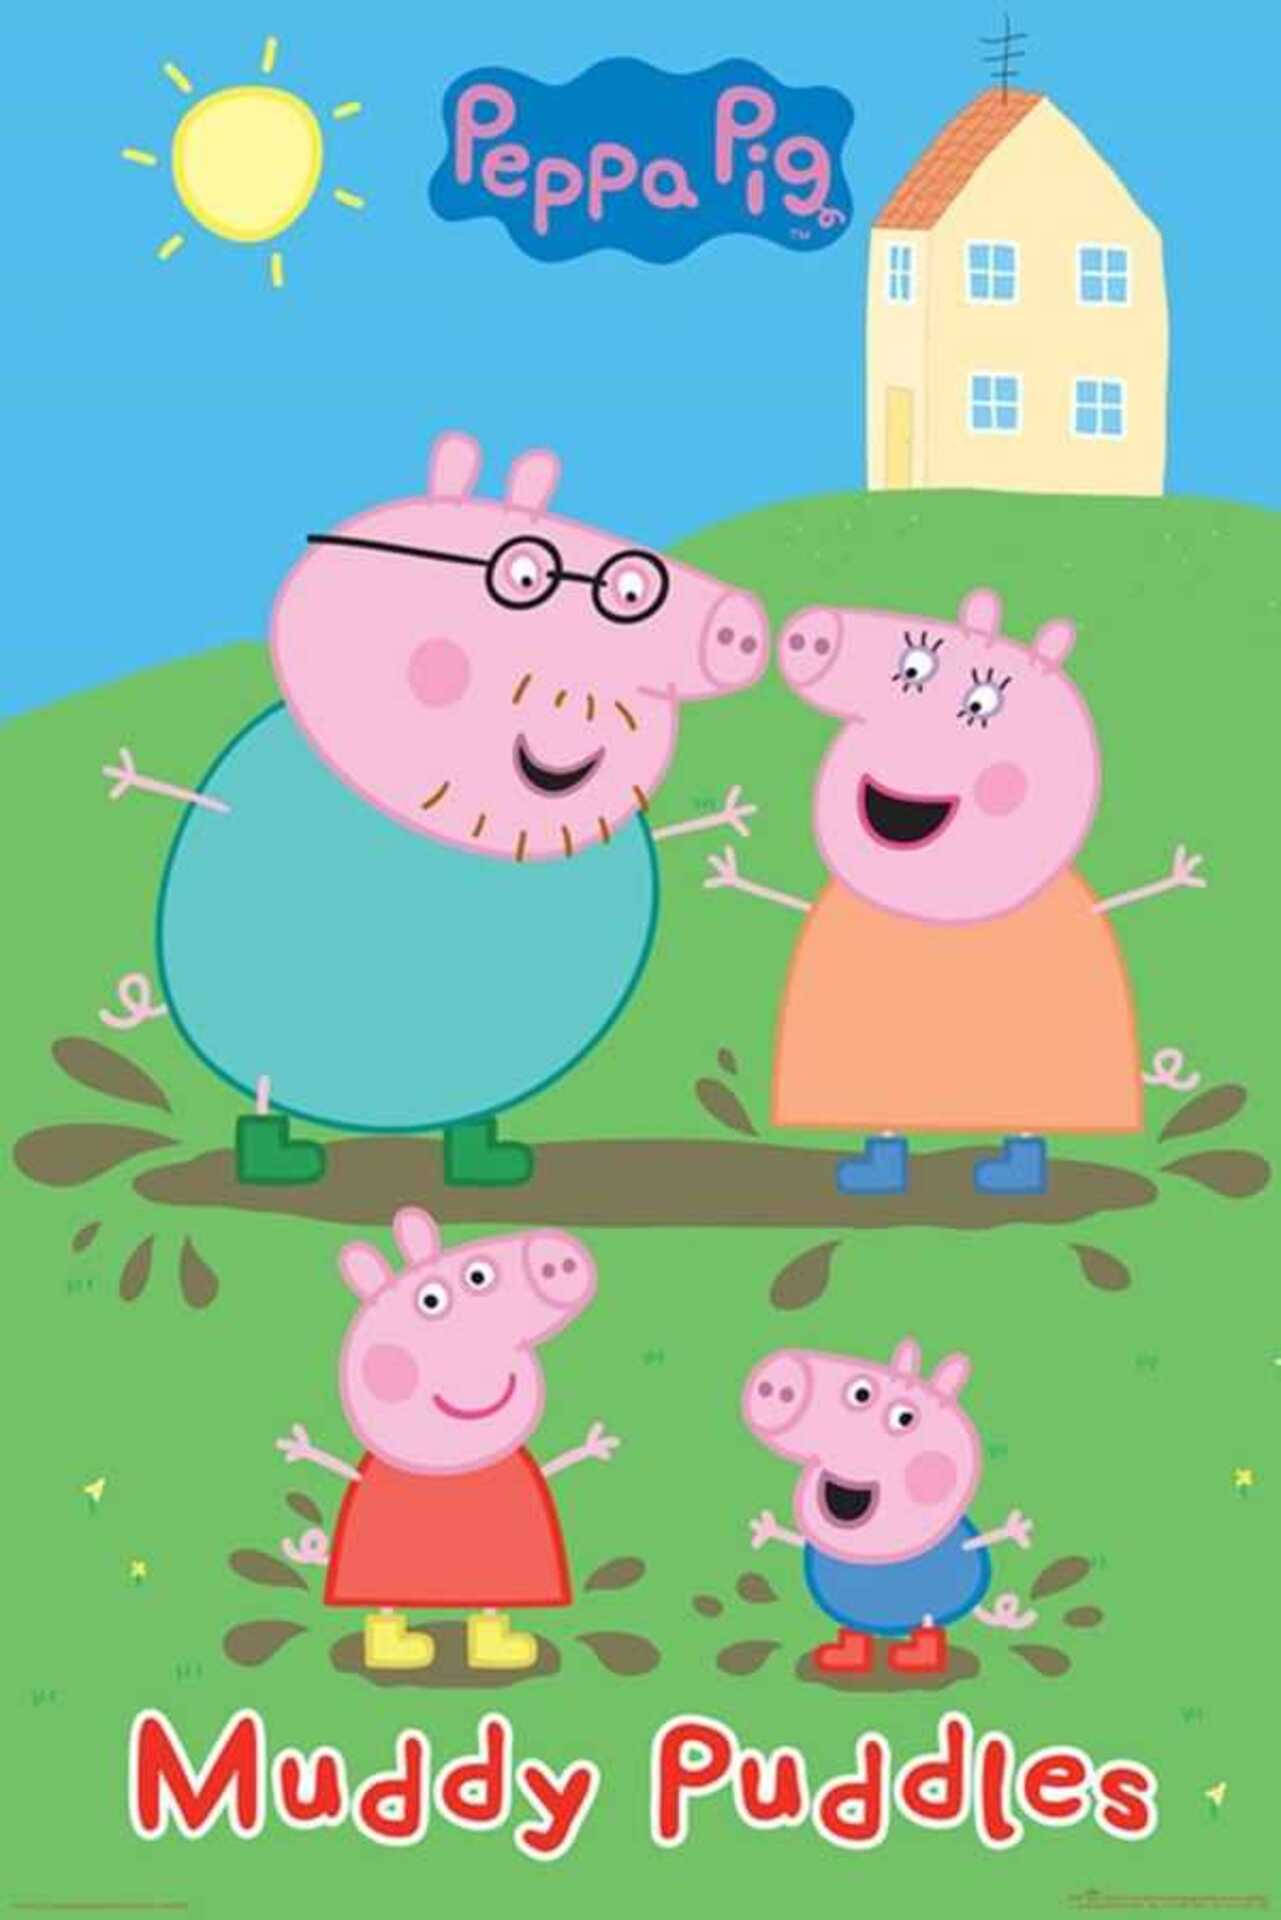 Peppa Pig And Her Friends Playing In A Muddy Puddle Background